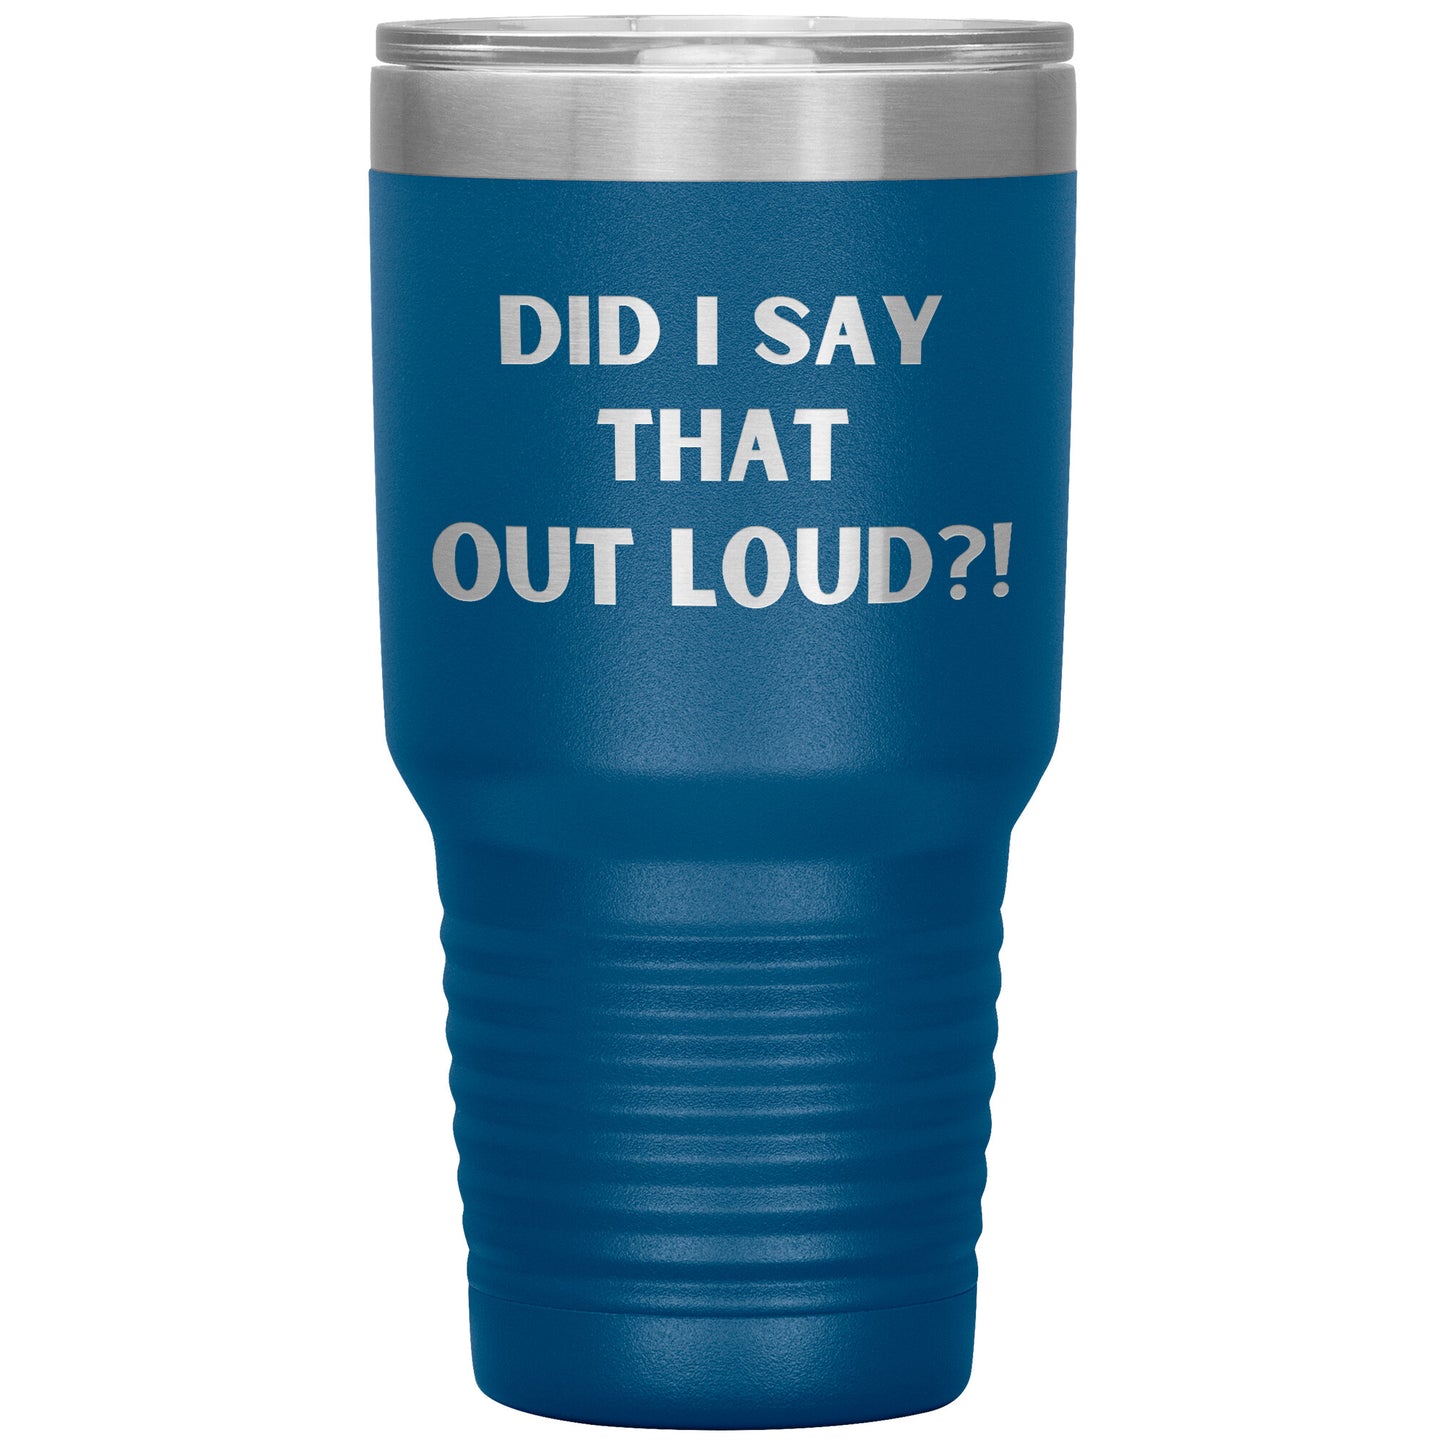 "Did I say That Out Loud?!" Durable, Insulated 30 oz. Tumbler